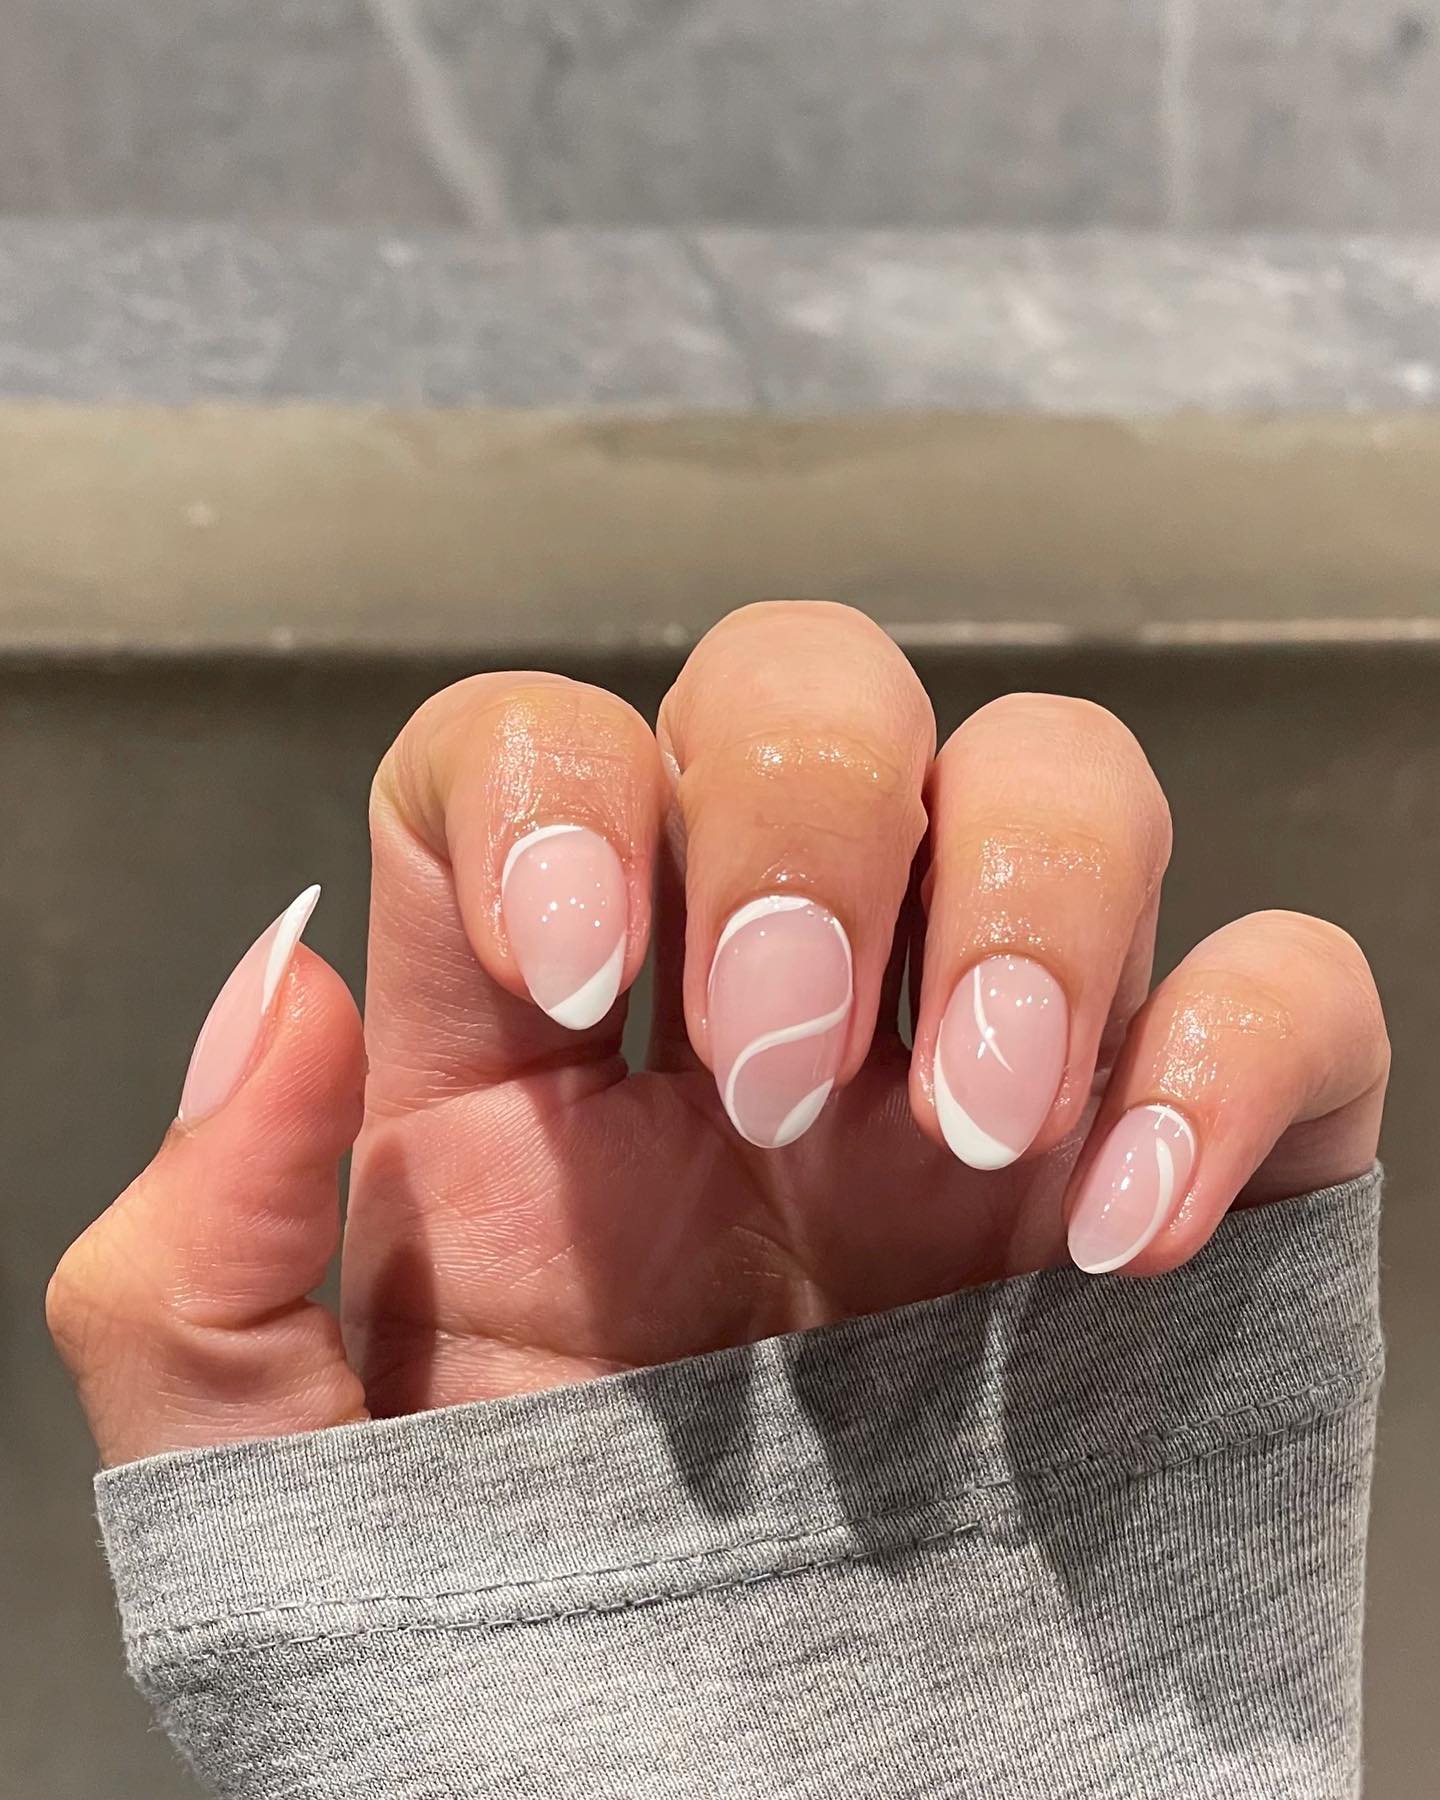 Pink And White Almond Nails